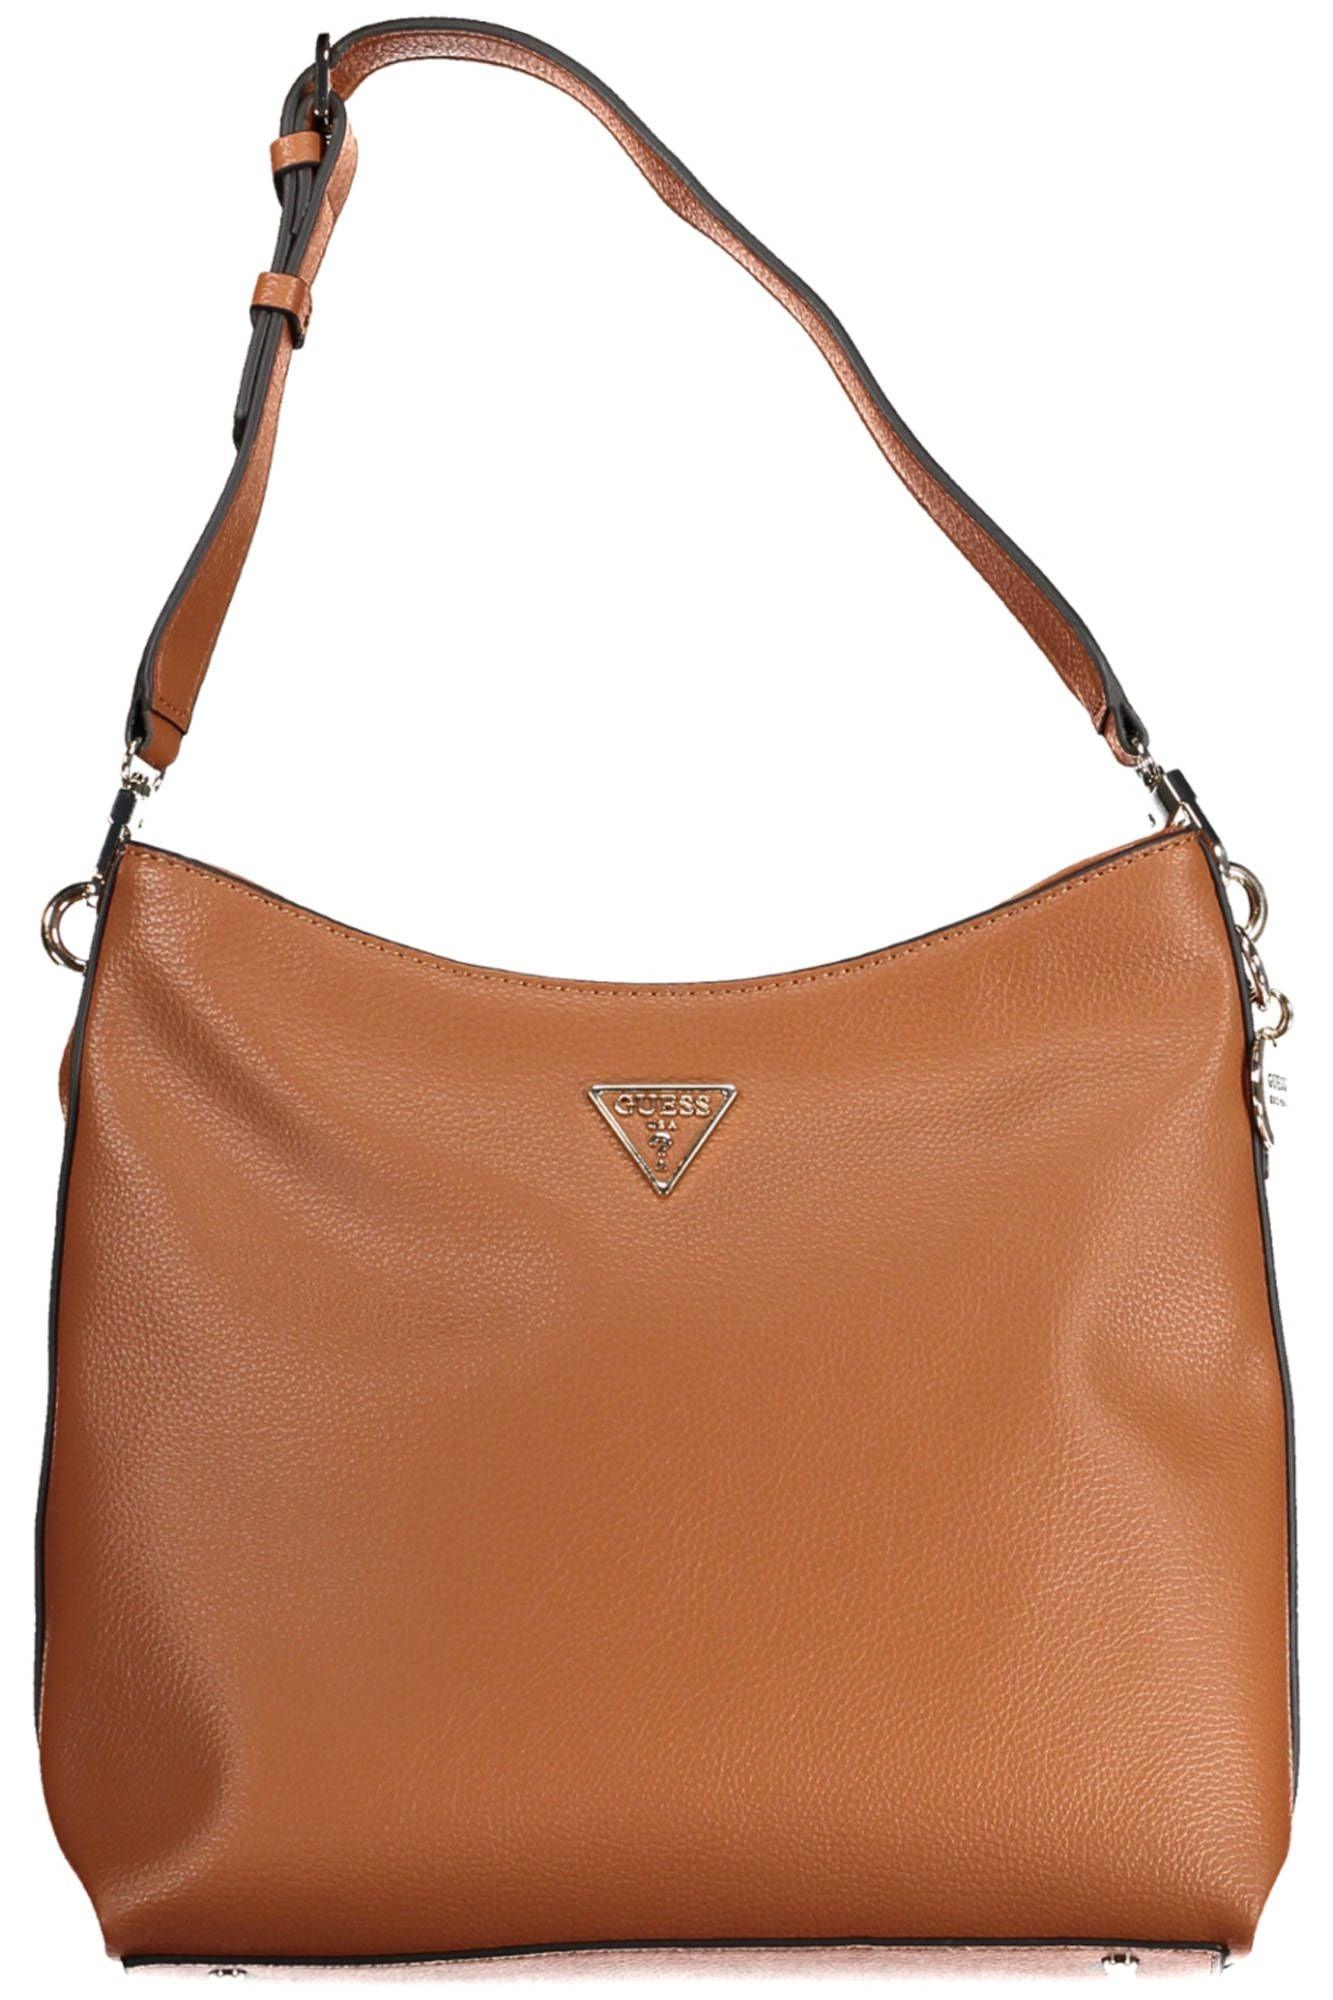 Guess Jeans Chic Brown Shoulder Bag with Logo Detail - PER.FASHION